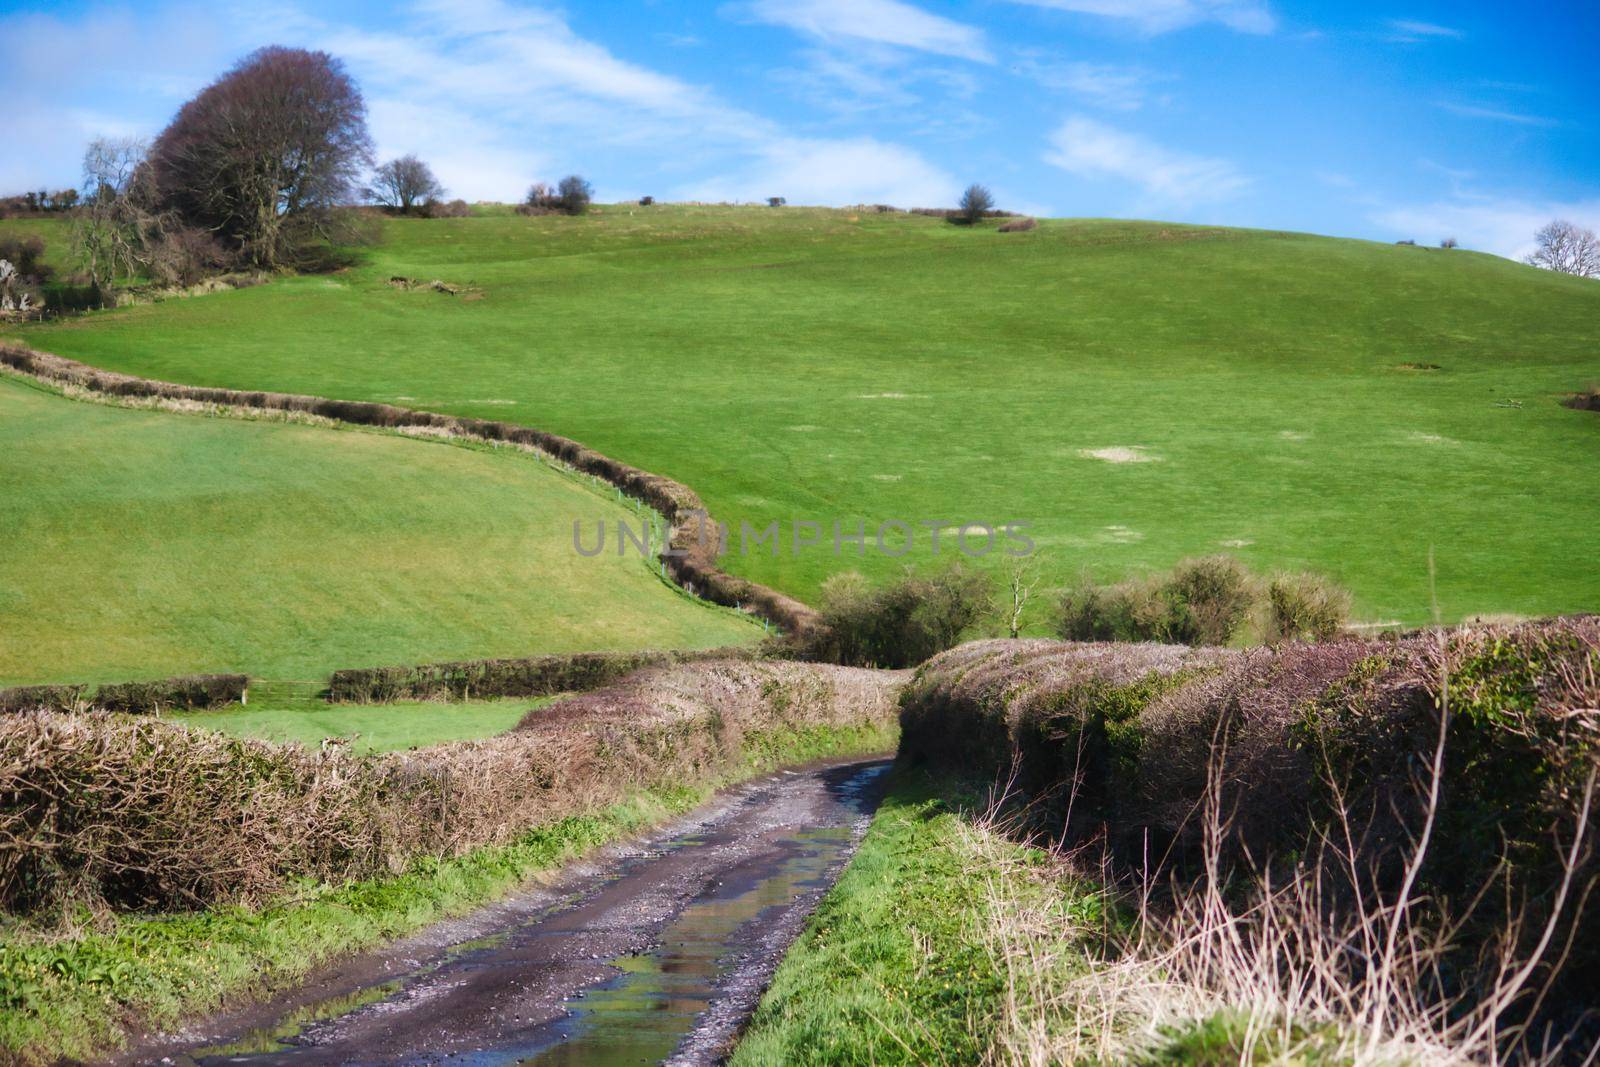 Scenic rolling hills in the English countryside with lush green grass and blue sky with no people